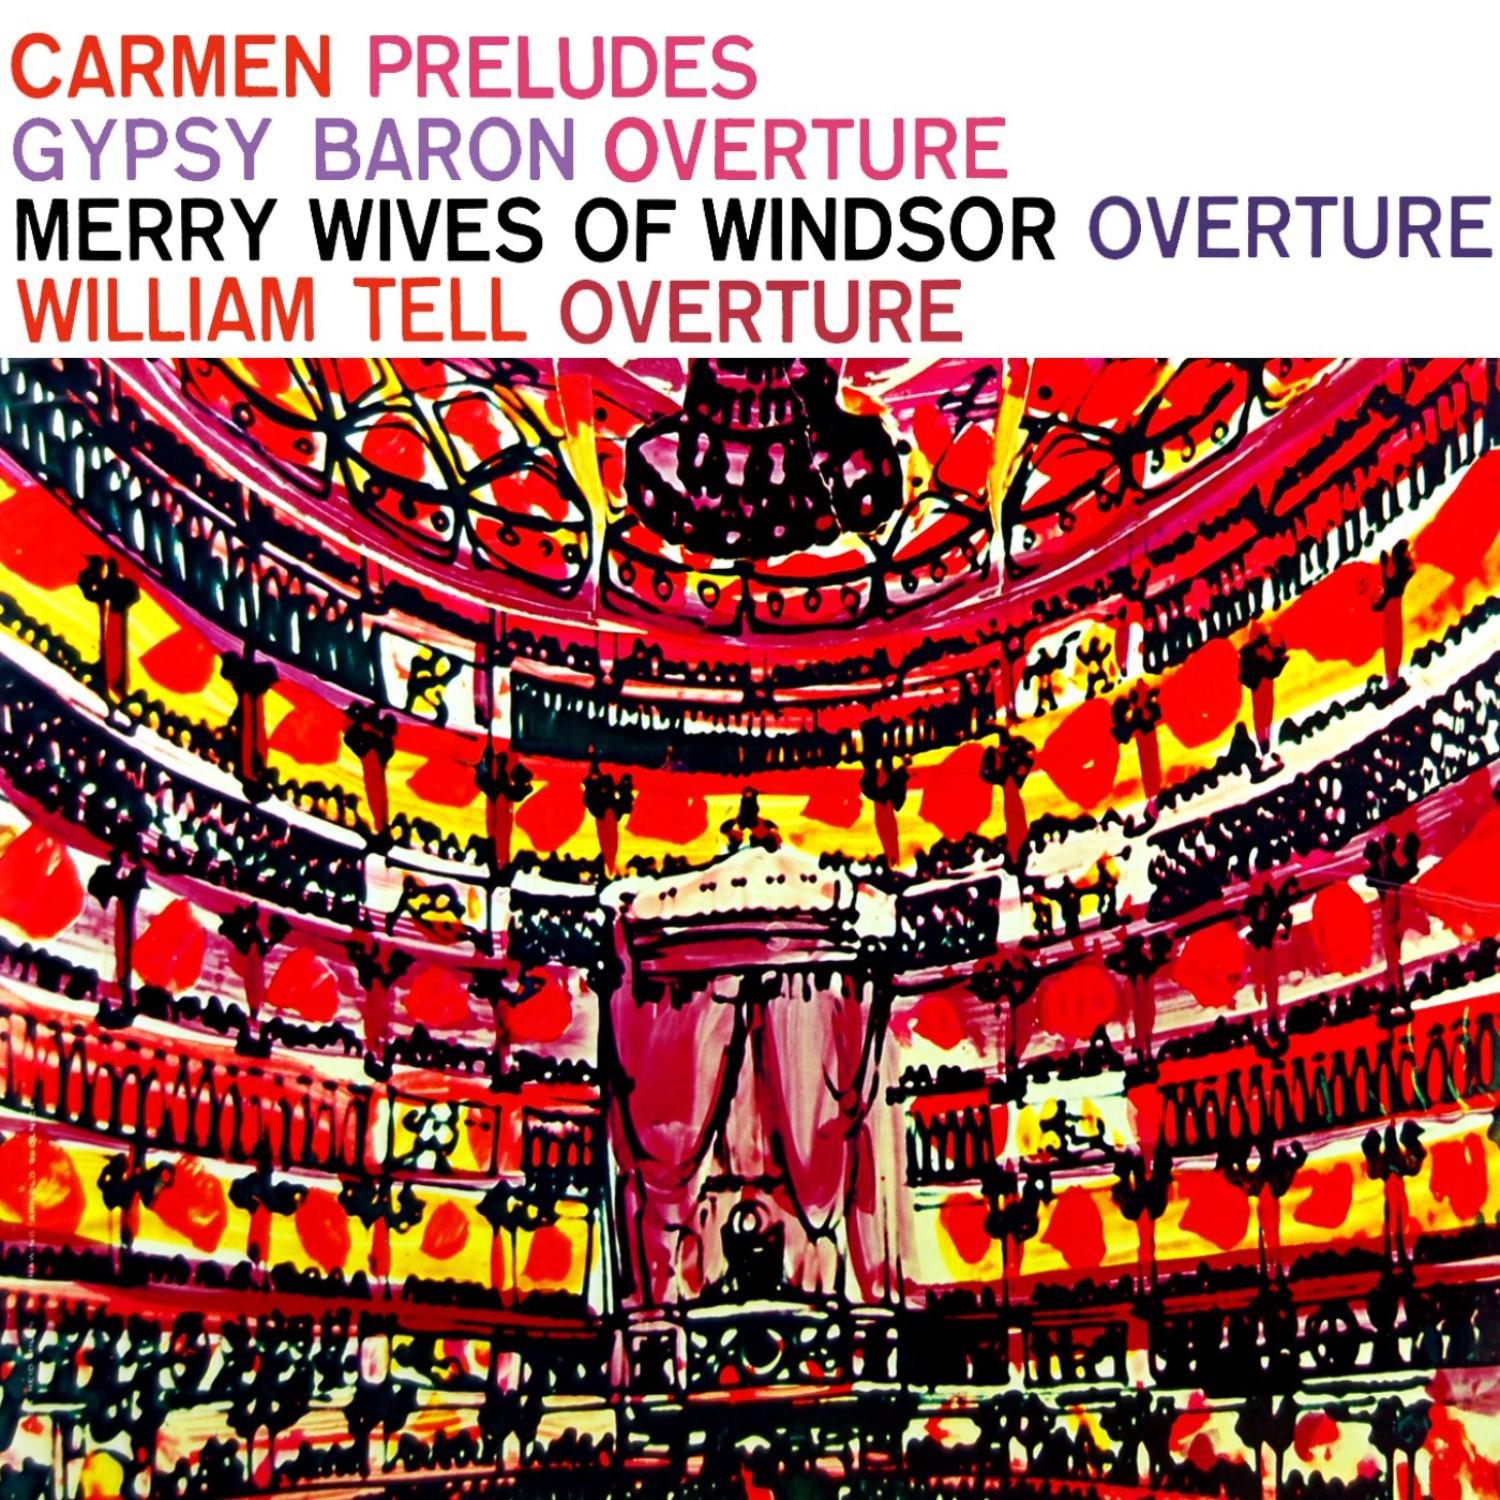 Hans Swarowsky - The Merry Wives of Windsor: Overture